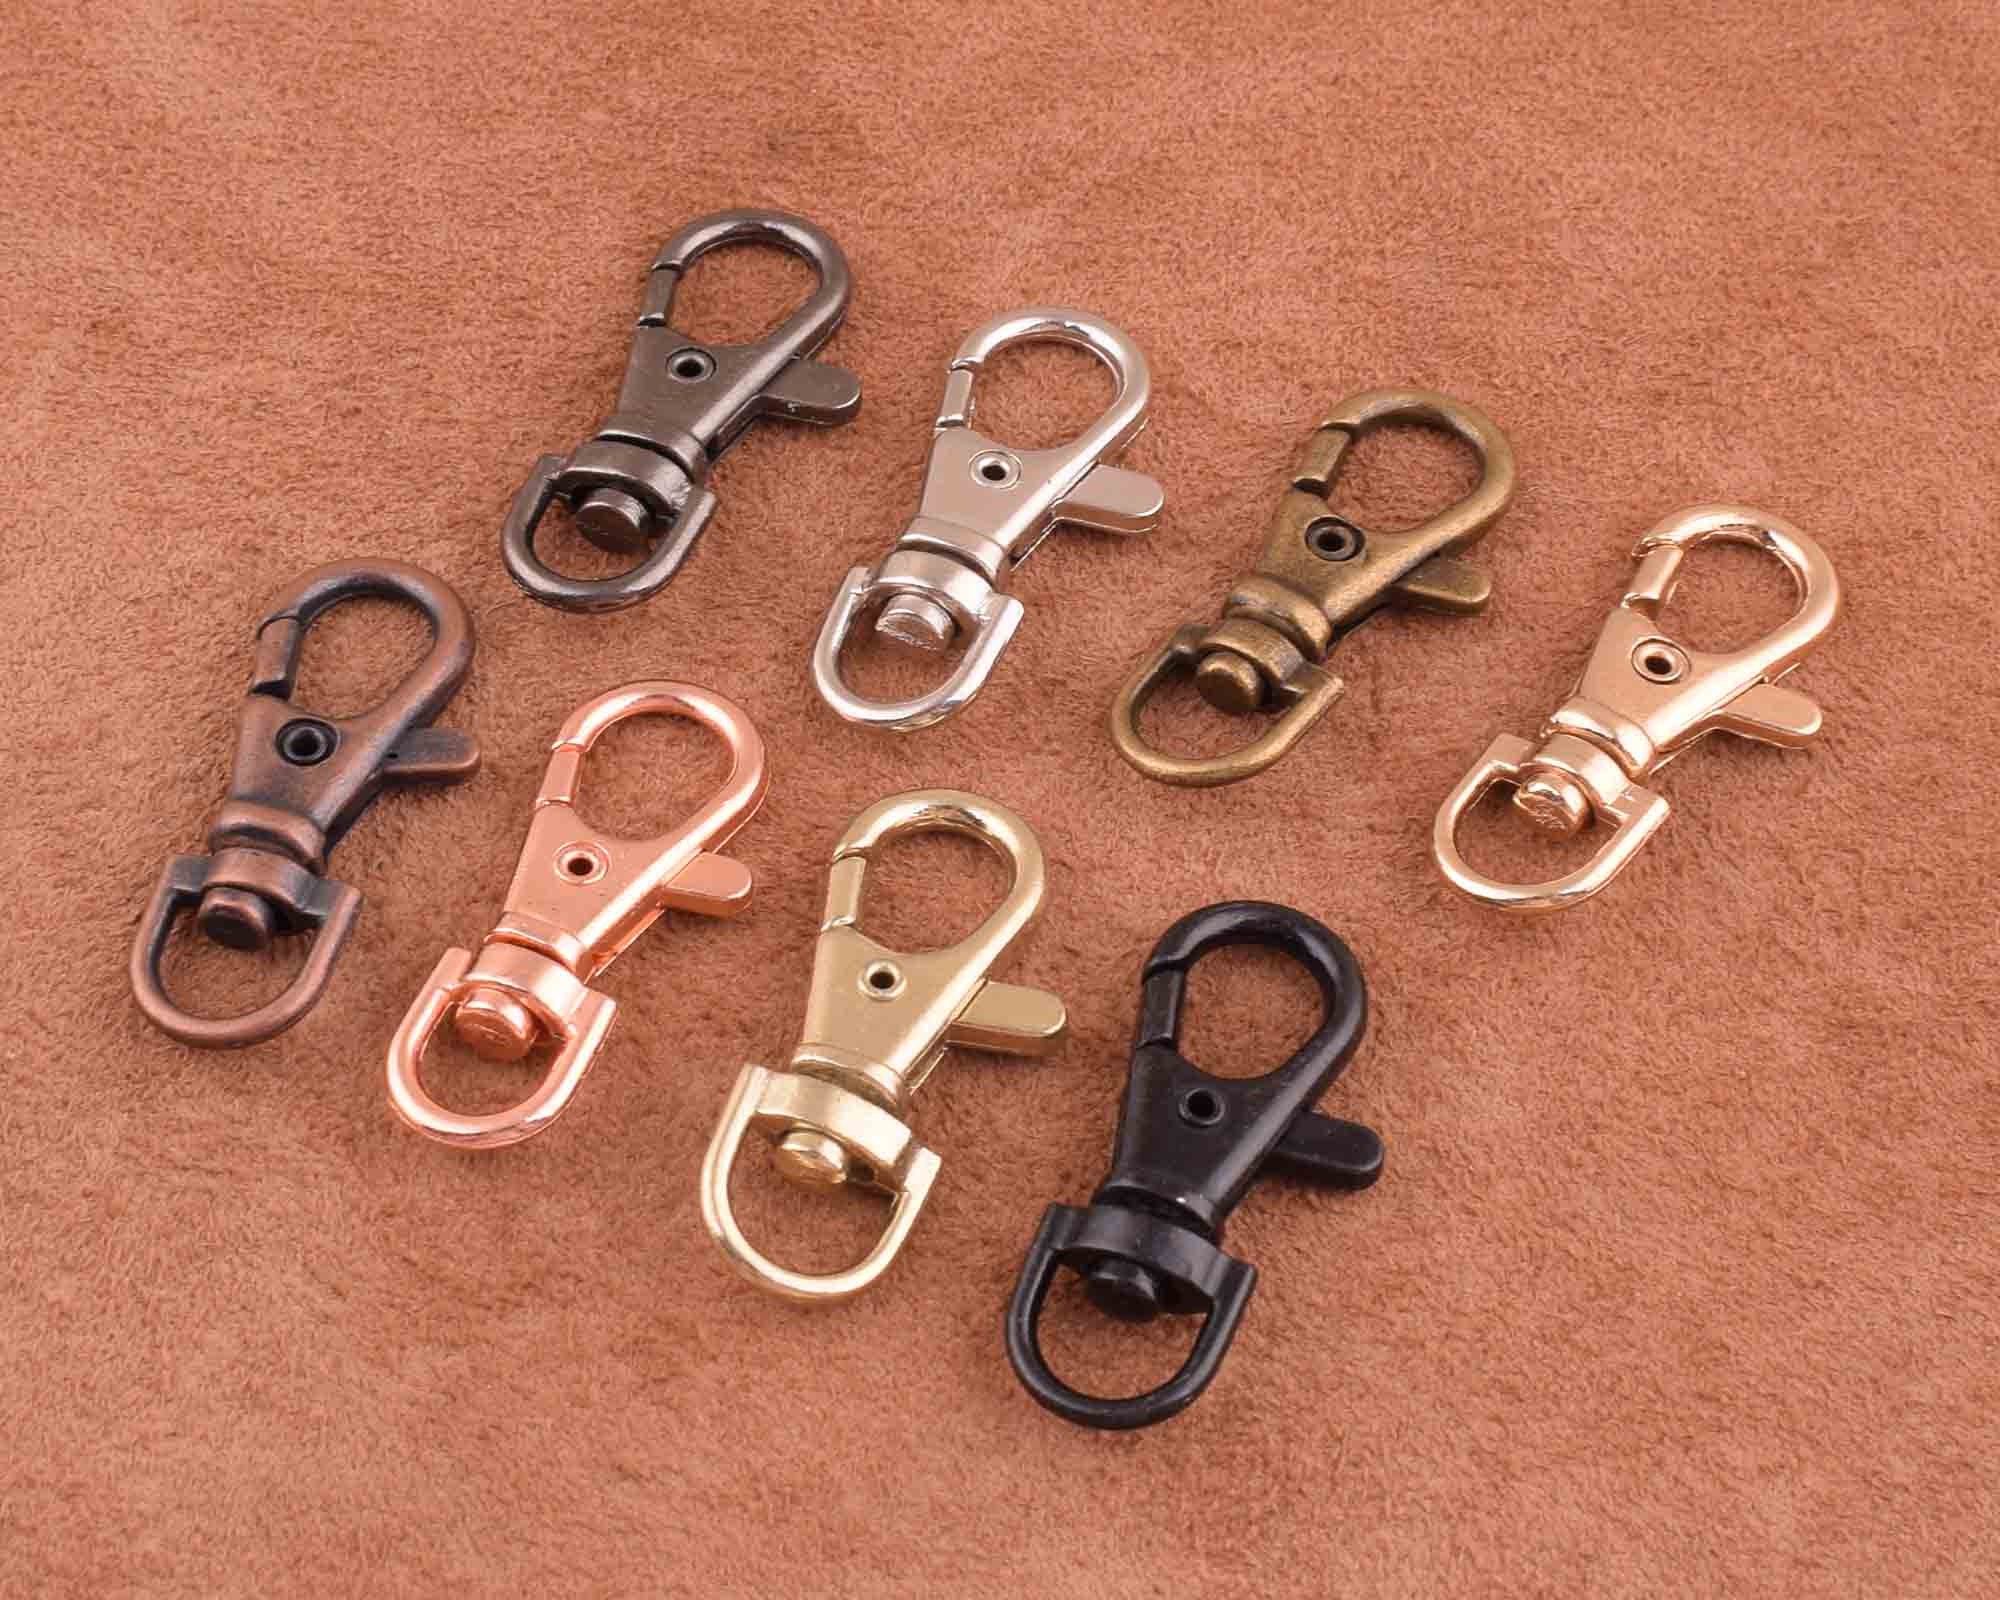 Swivel Clips - 1-Inch - 25mm - Lobster Clasp - Swivel Hooks - Bag Hardware  - Strap Hooks - Strap Clips - 2 Minutes 2 Stitch